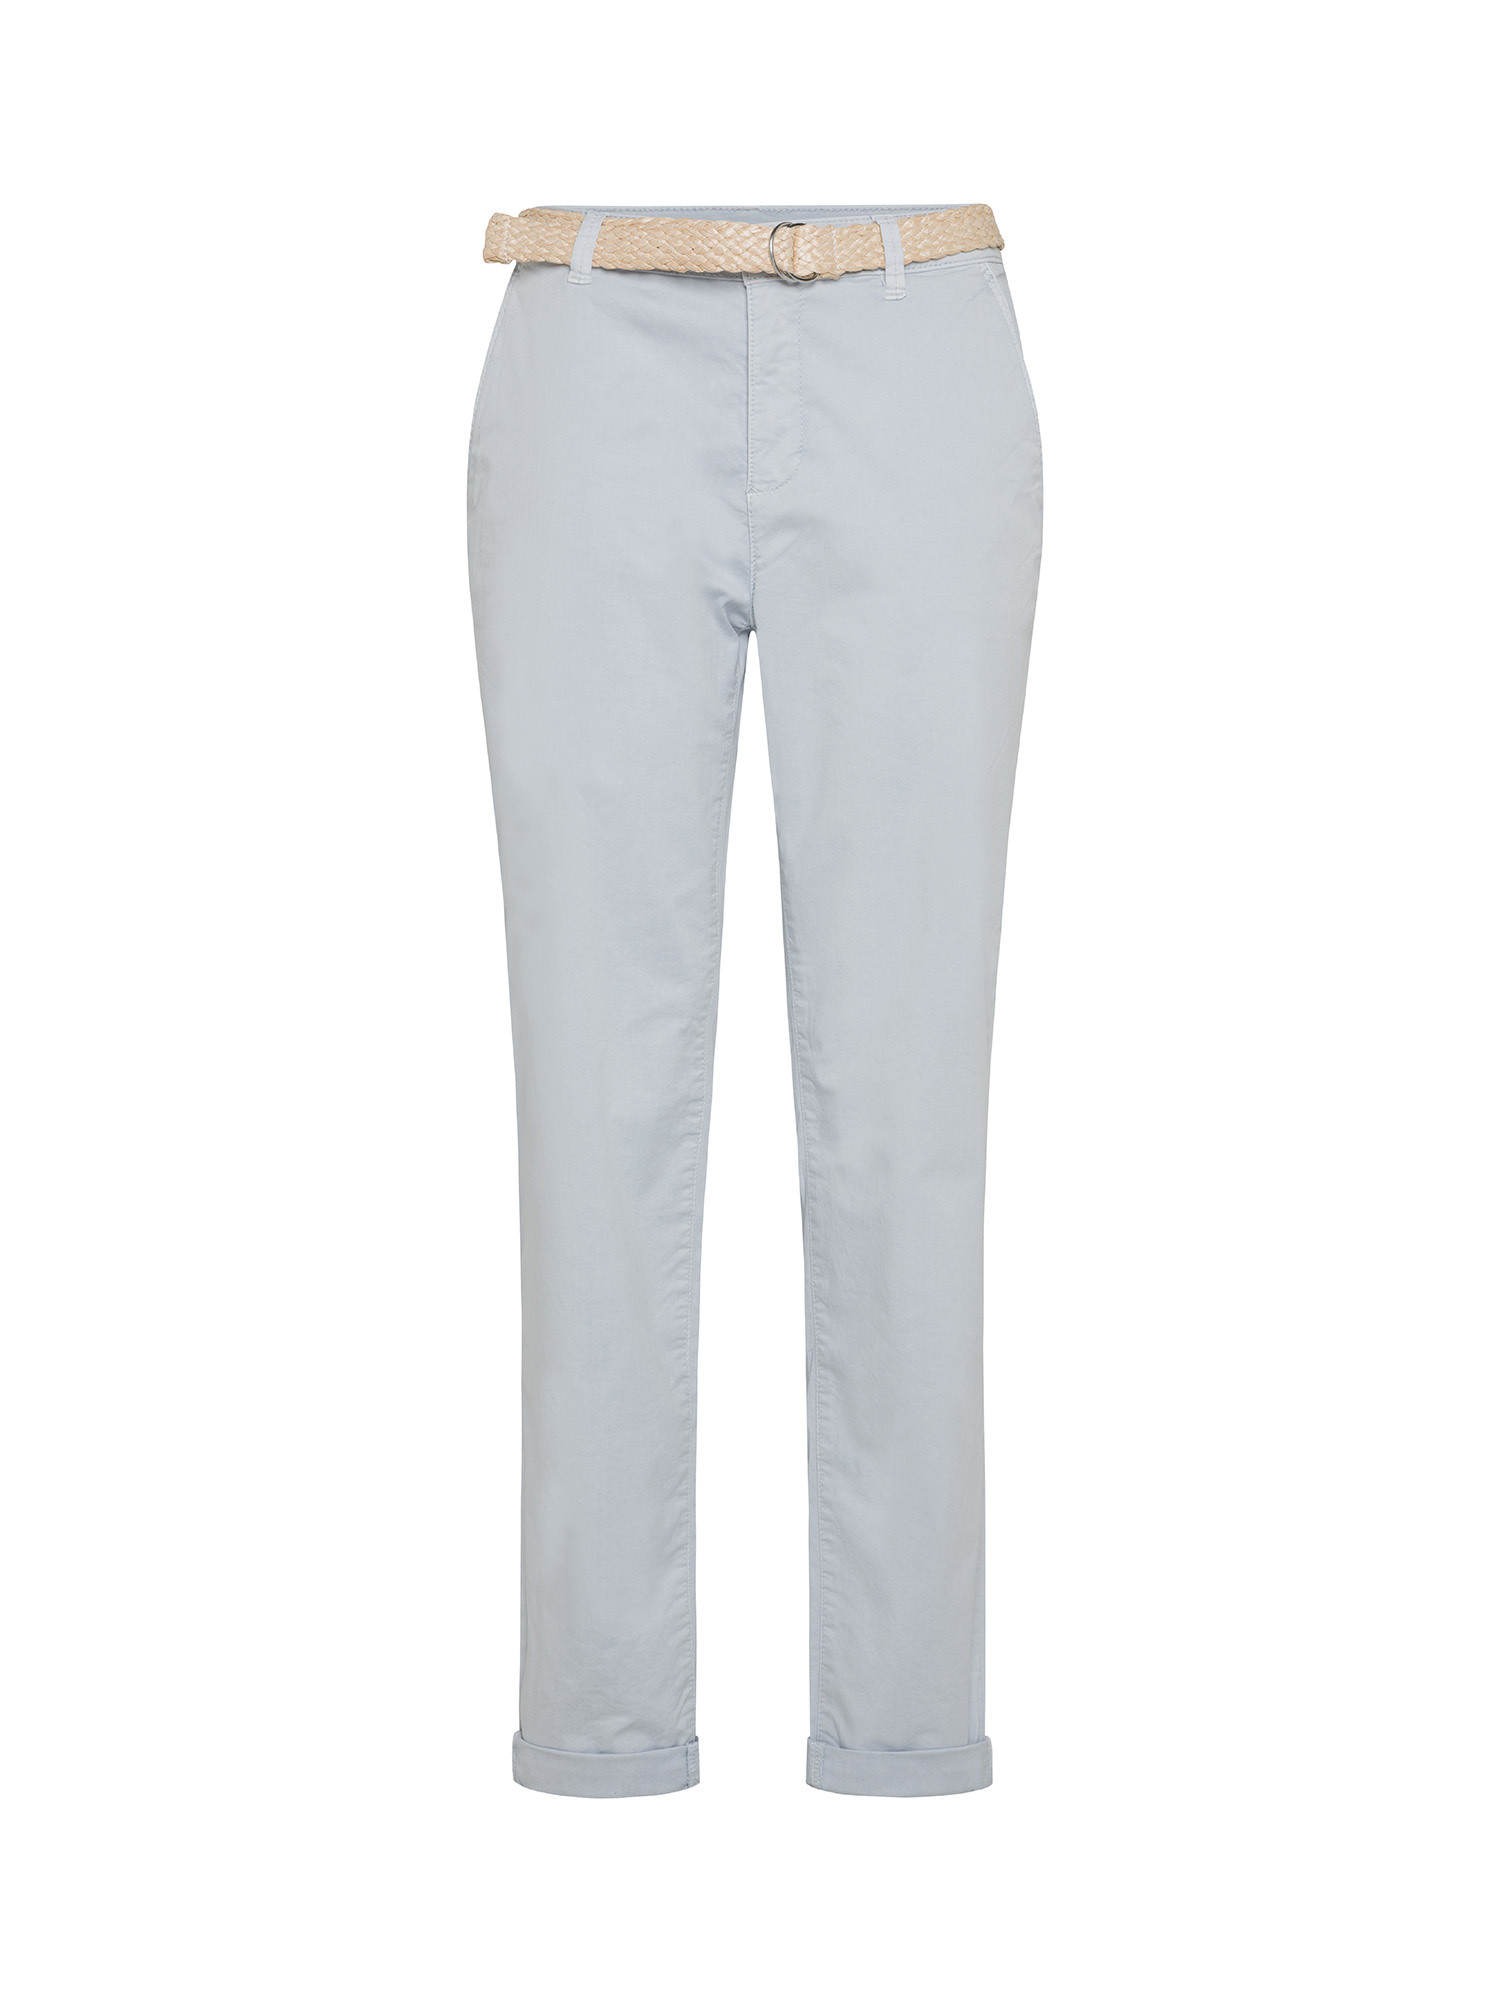 Esprit - Cropped chinos with belt, Light Blue, large image number 0